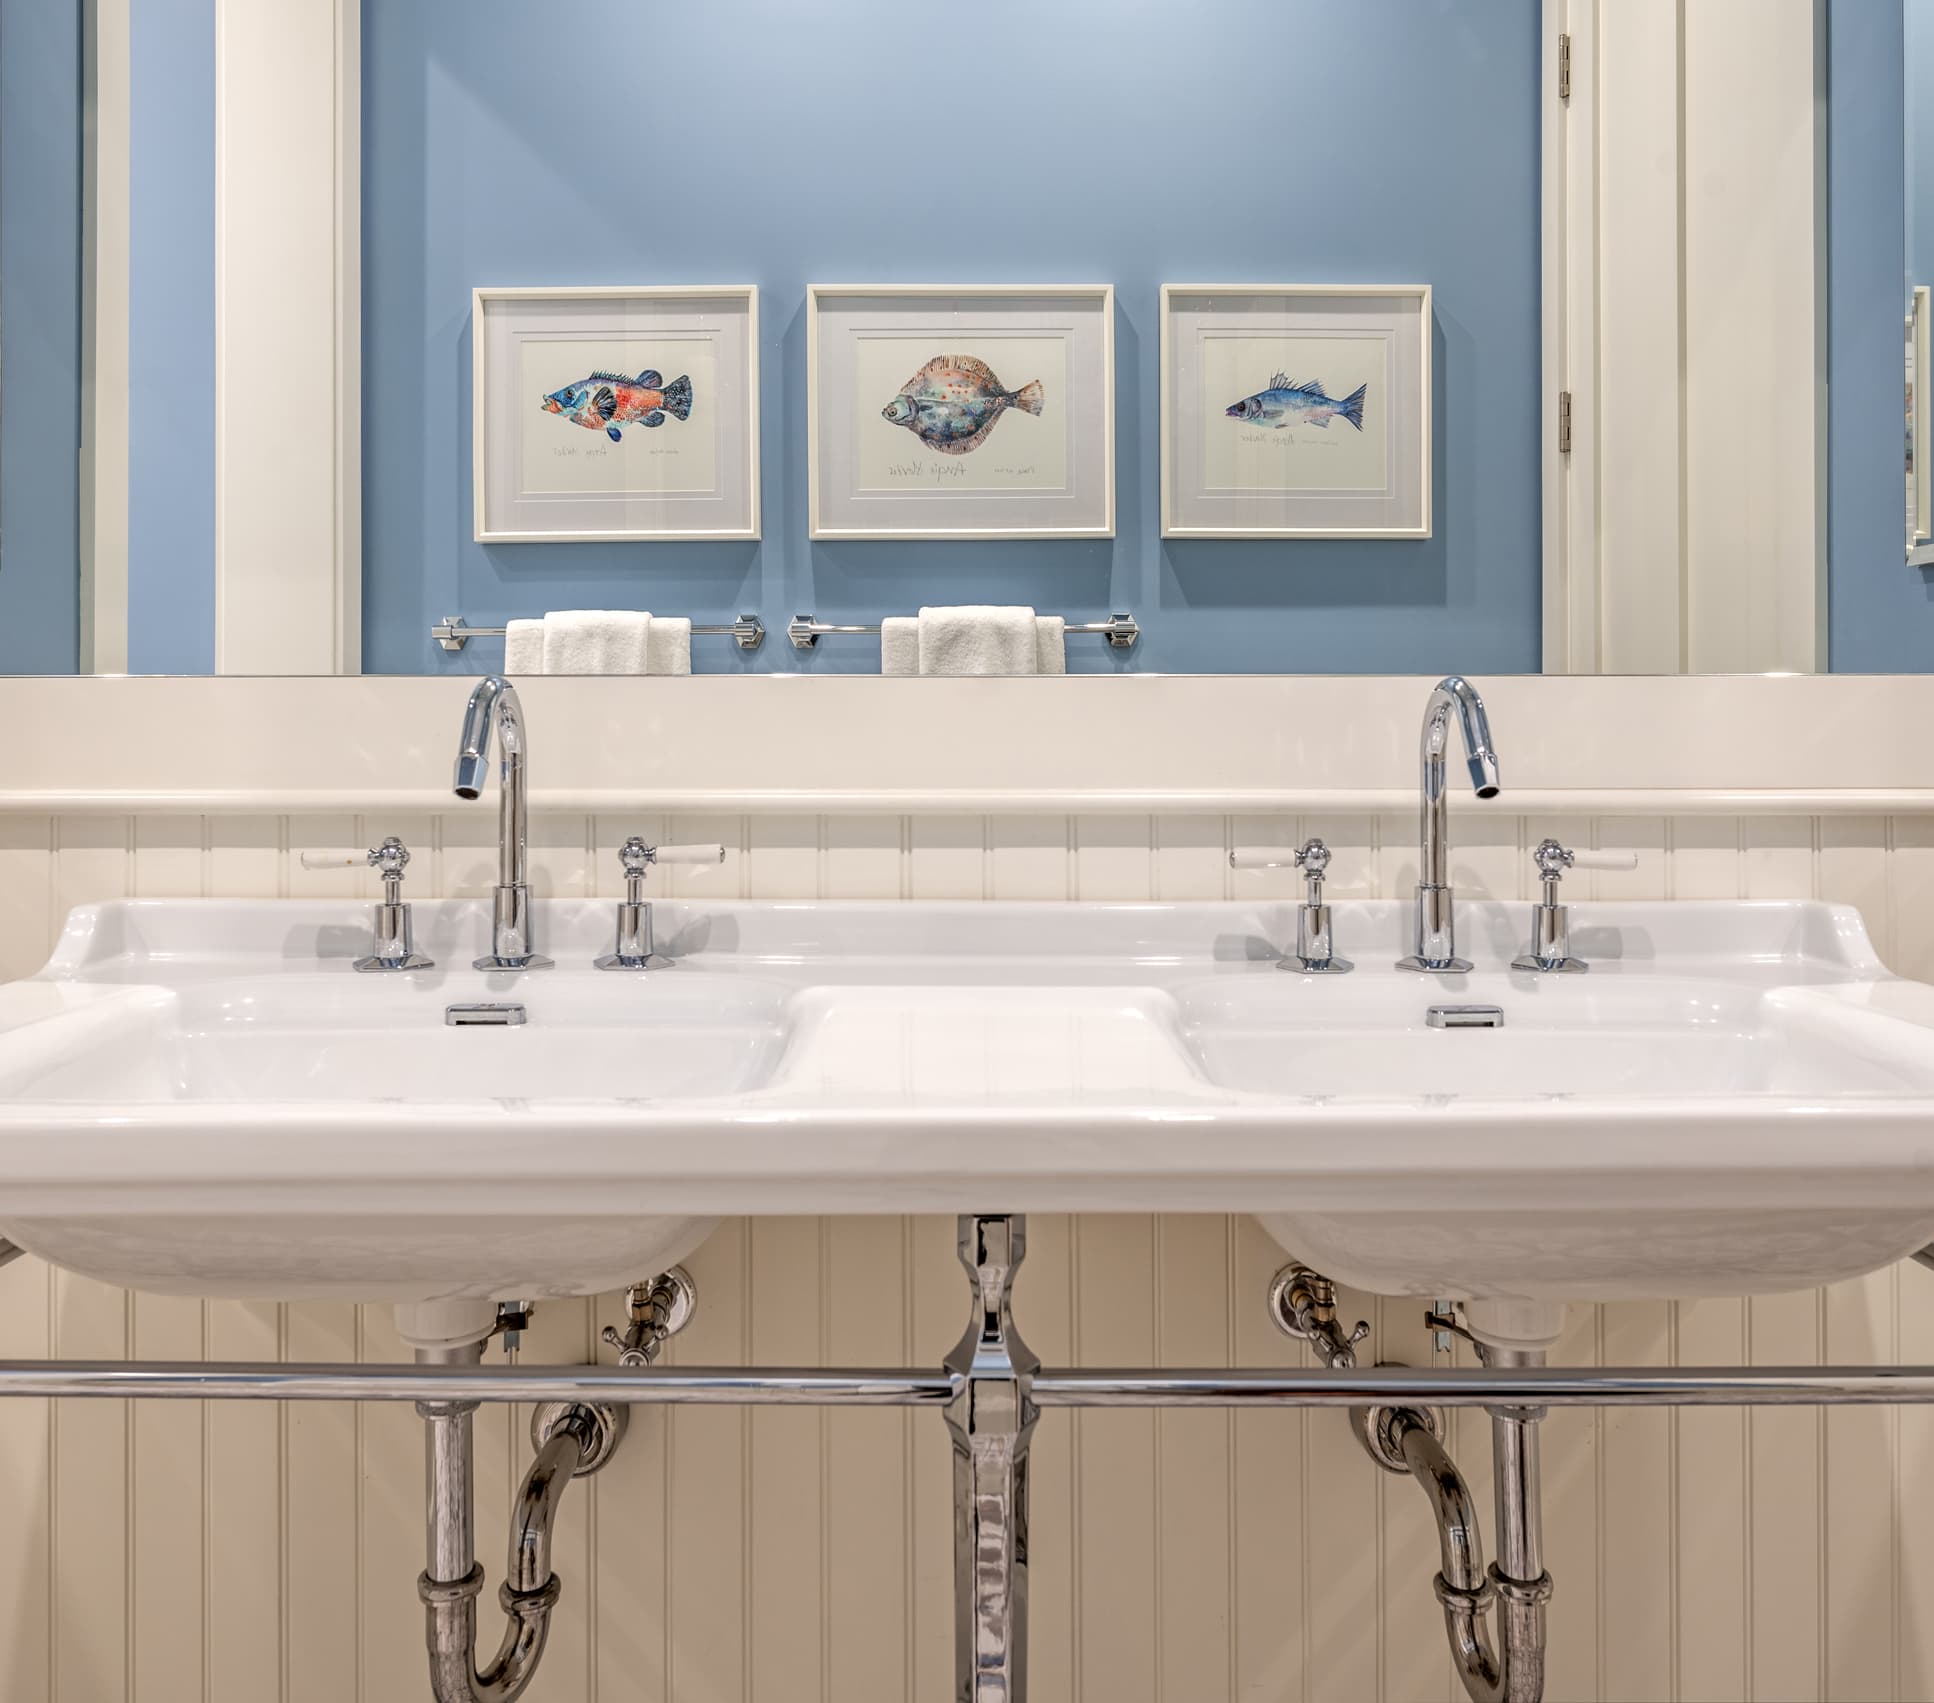 His And Her Sink Blue Bathroom Fish Framed Wall Paintings